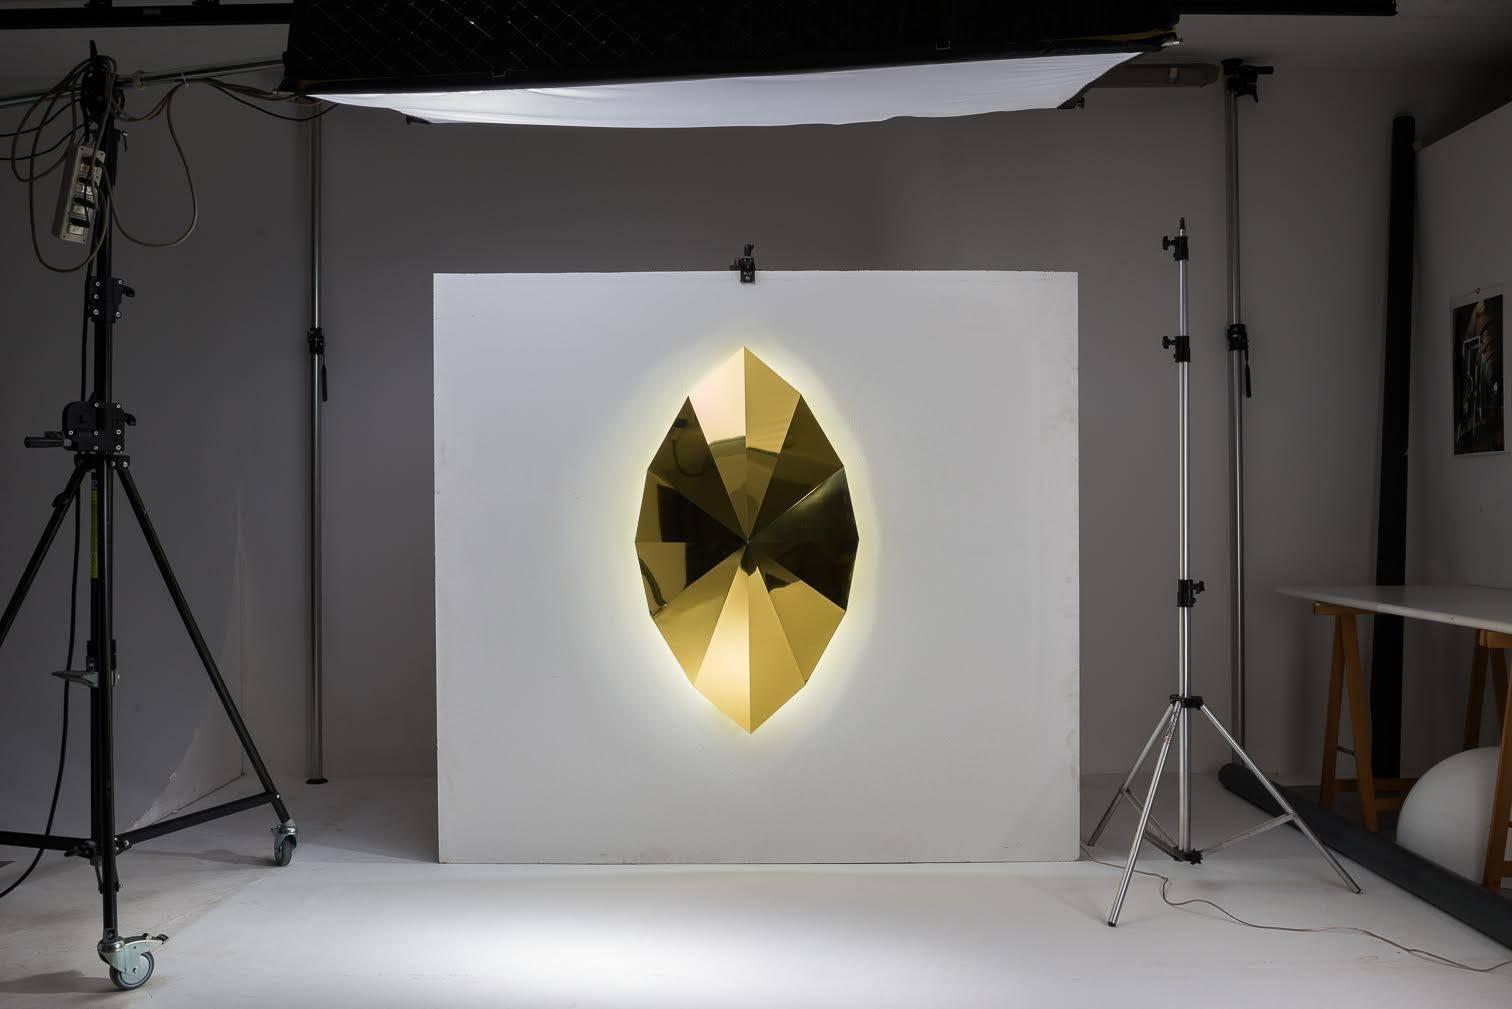 Wall light large, made of brass or aluminium gold finish with LED lighting. Through the study and application of sacred geometry, Gio Minelli creates with her bright work, conditions to induce the mind to silence and contemplation.

Biography
Gio